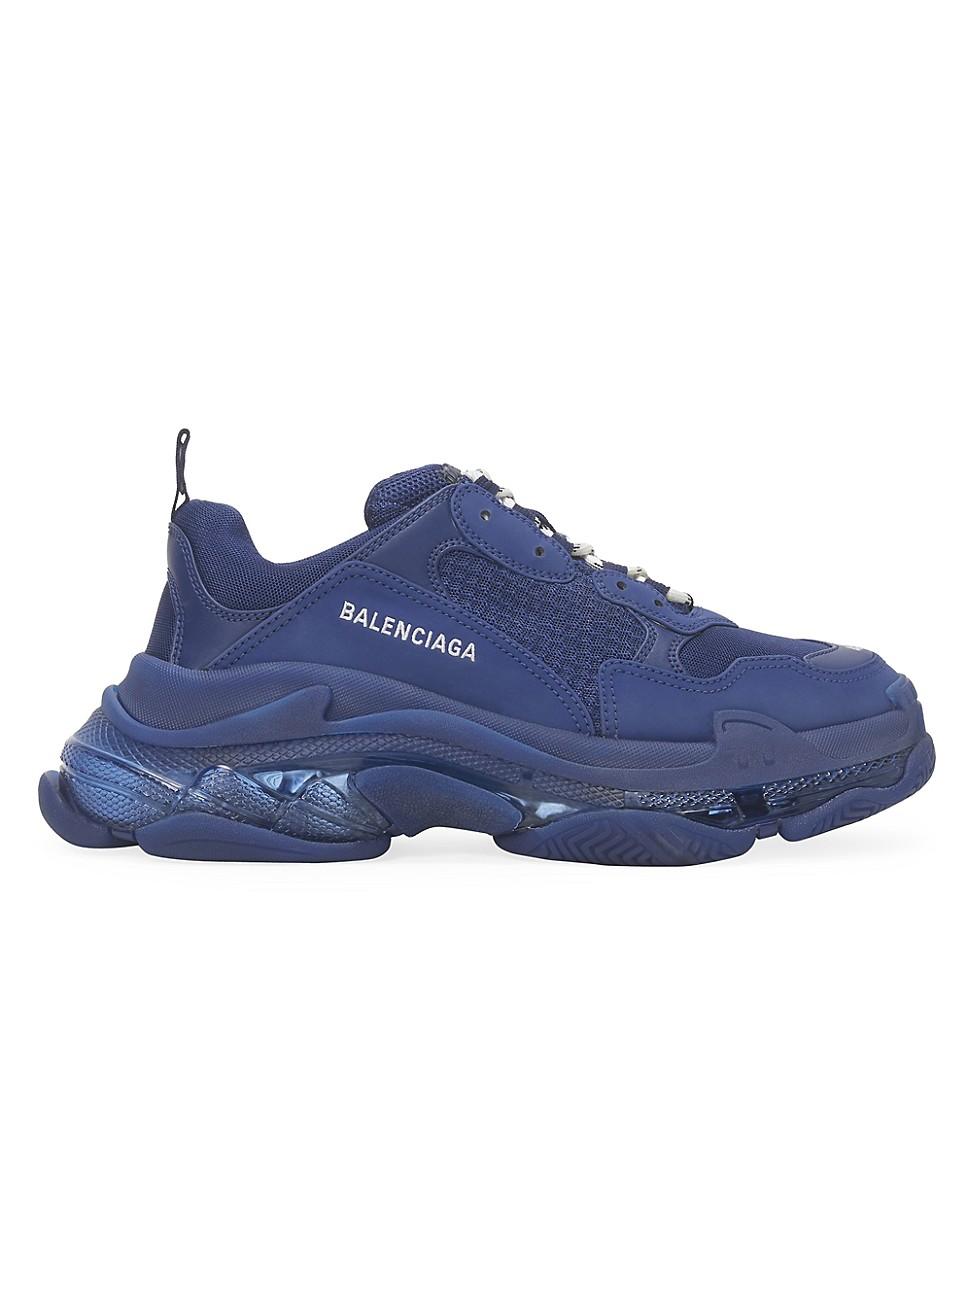 Balenciaga Triple S Airsole Leather And Mesh Trainers in Navy (Blue) - Lyst